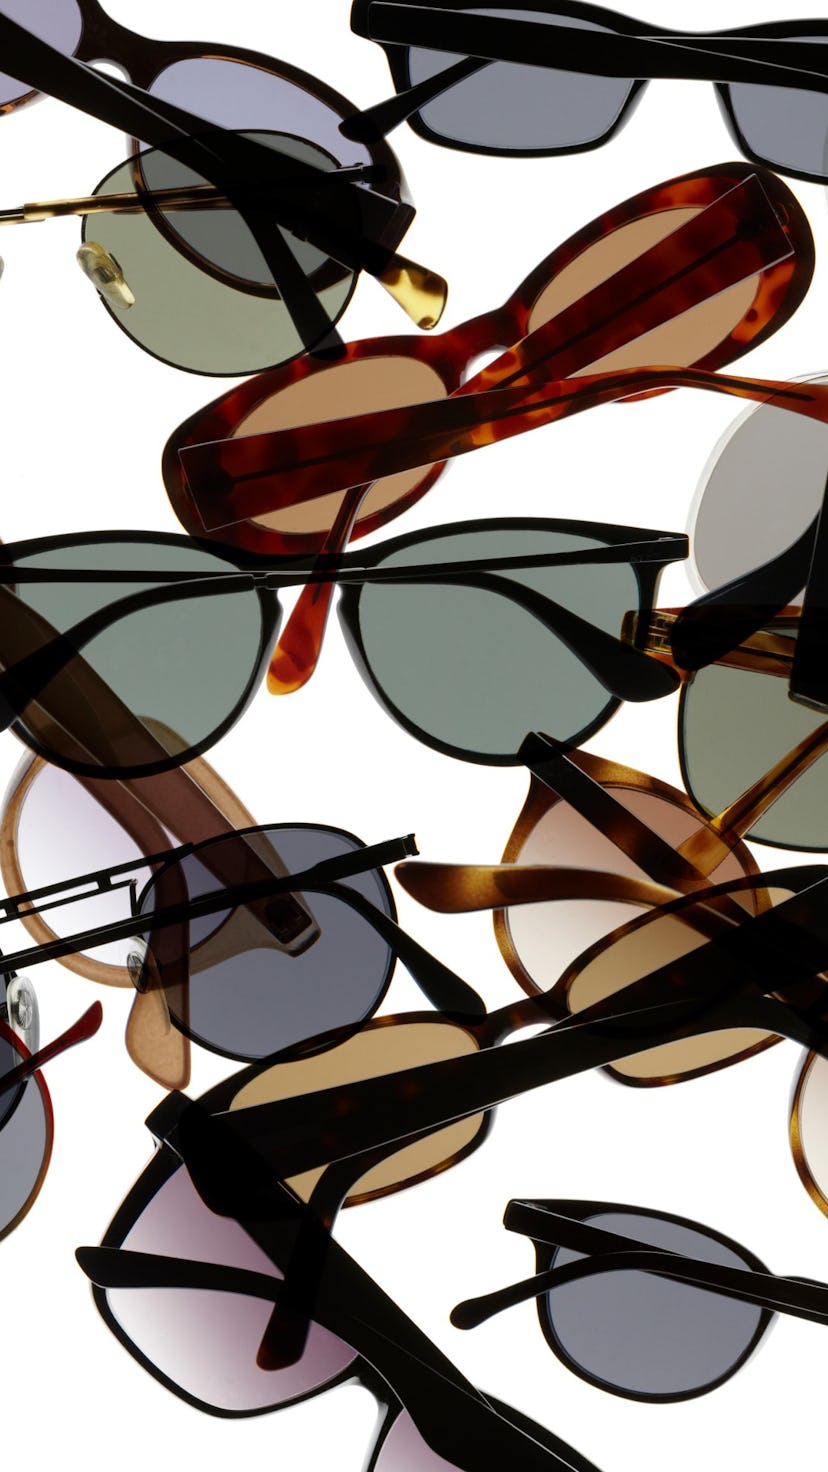 Collage of many different types of sunglasses